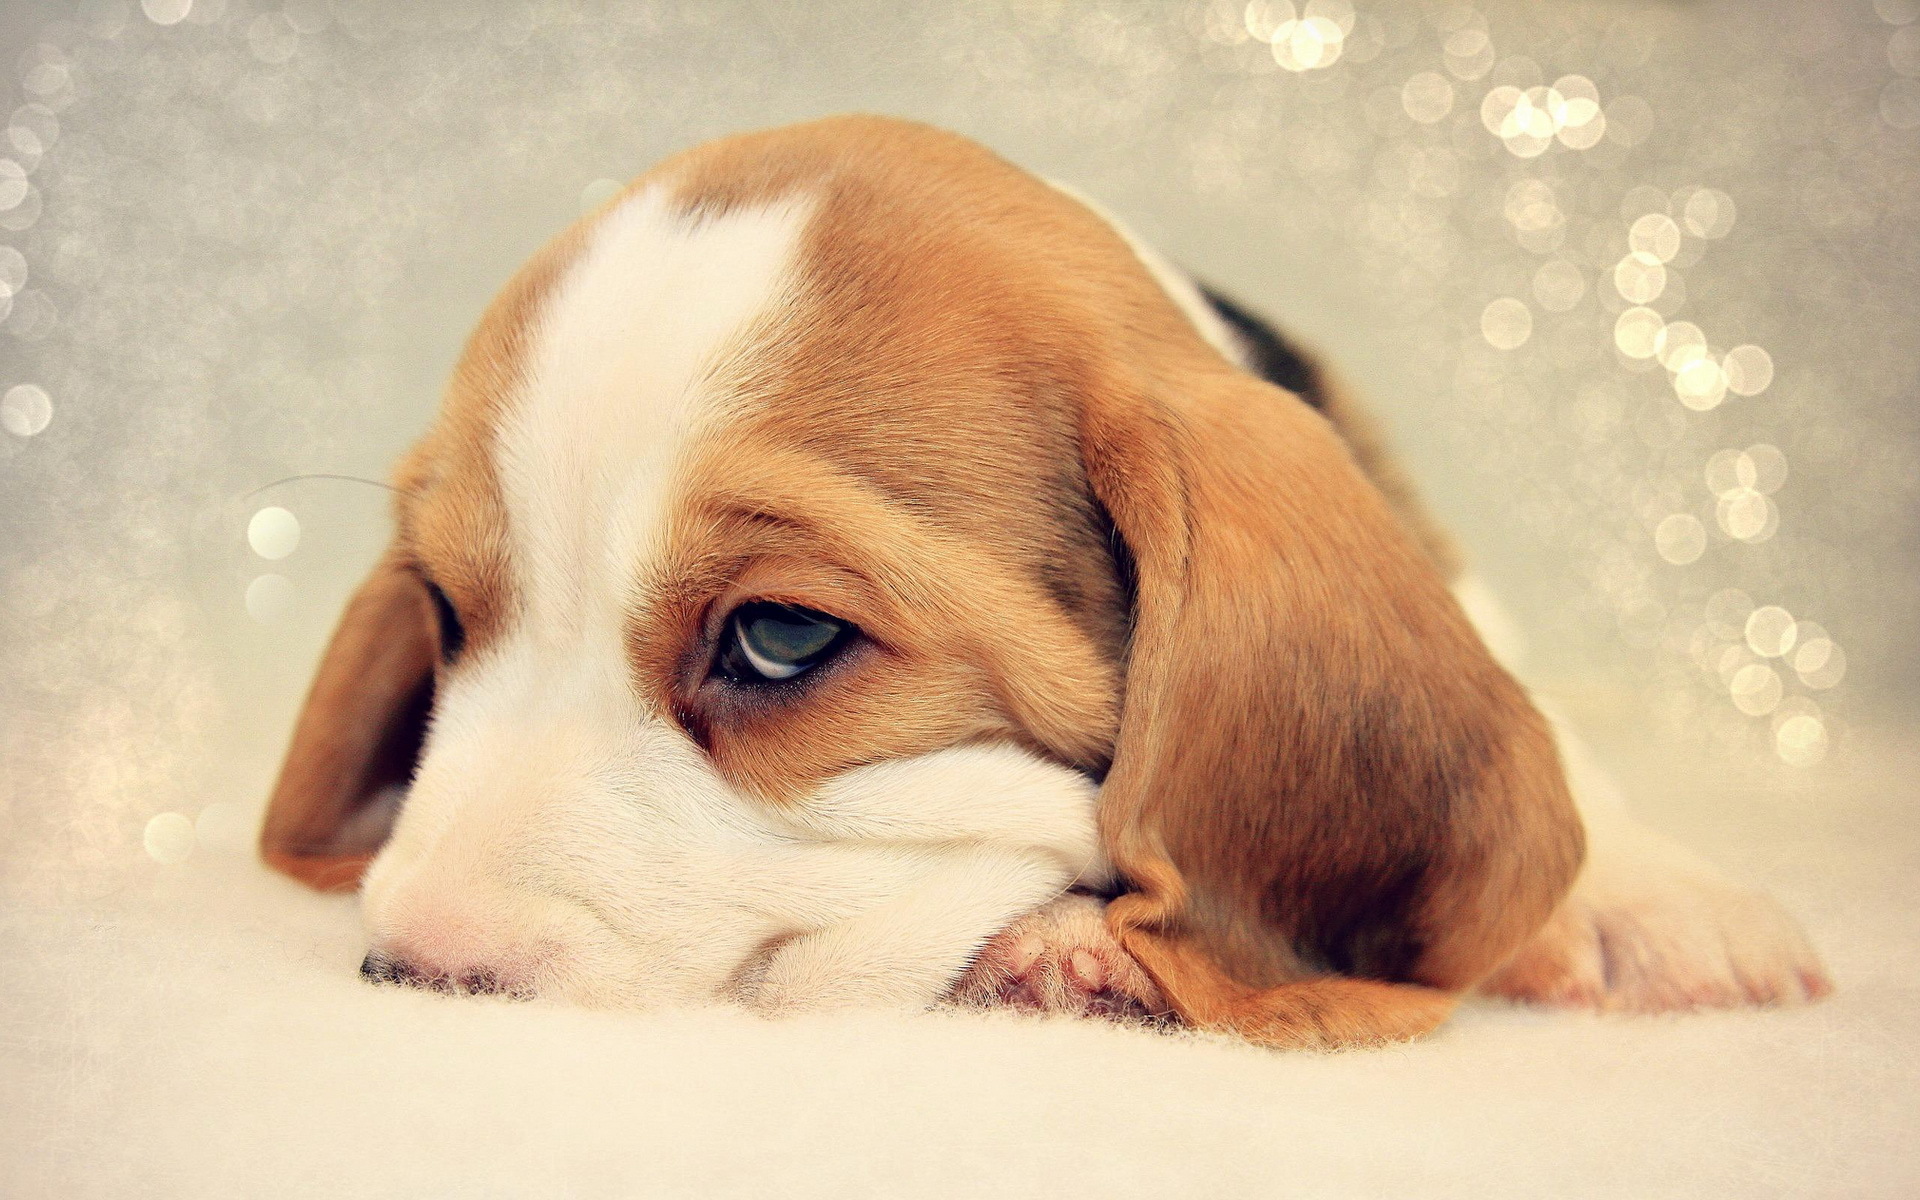 Sad beagle puppy nuzzled in bed Desktop wallpapers 640x480